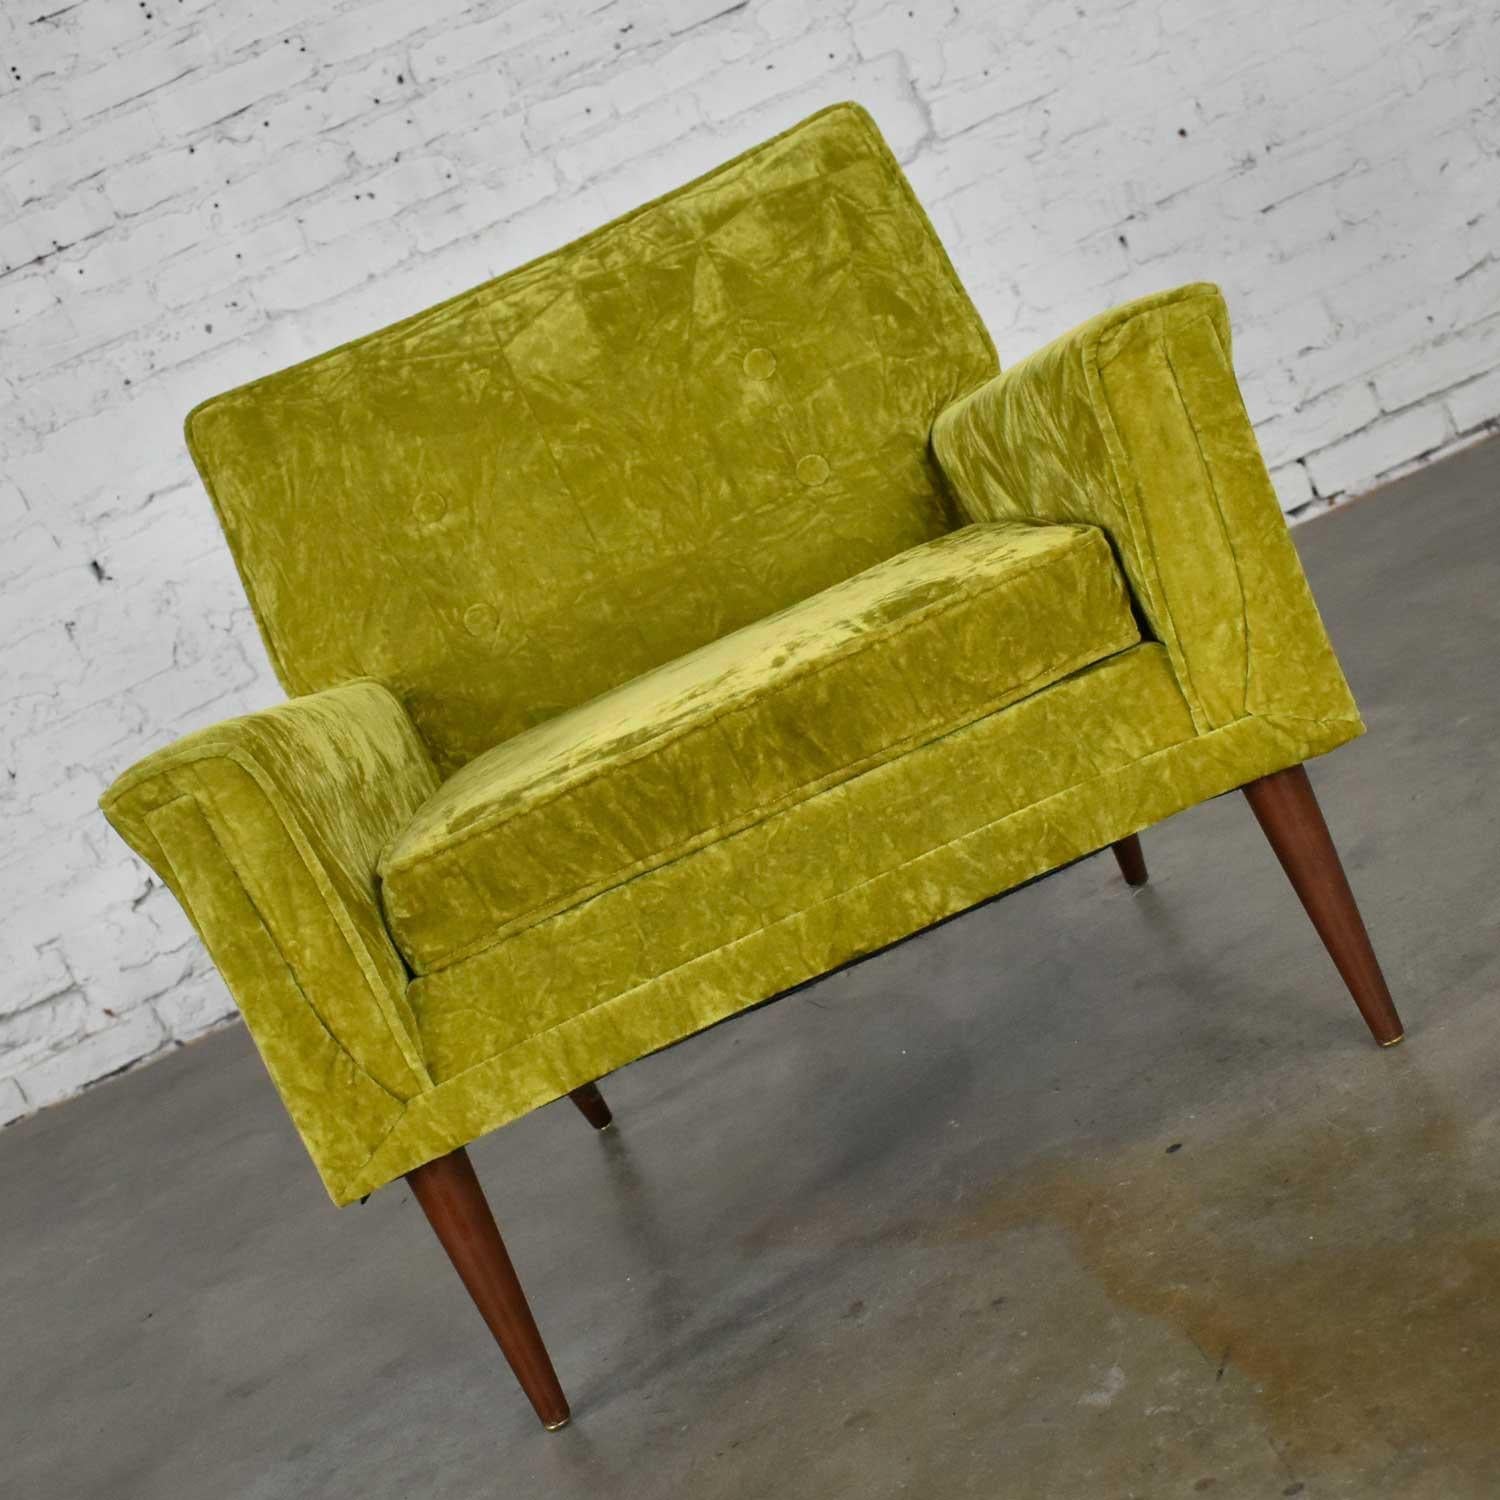 Gorgeous Mid-Century Modern chartreuse crushed velvet club chair or lounge chair in the style of Paul McCobb. Comprised of angled tapered wooden legs, brass colored metal feet, and it’s wearing its original chartreuse crushed velvet fabric with 4